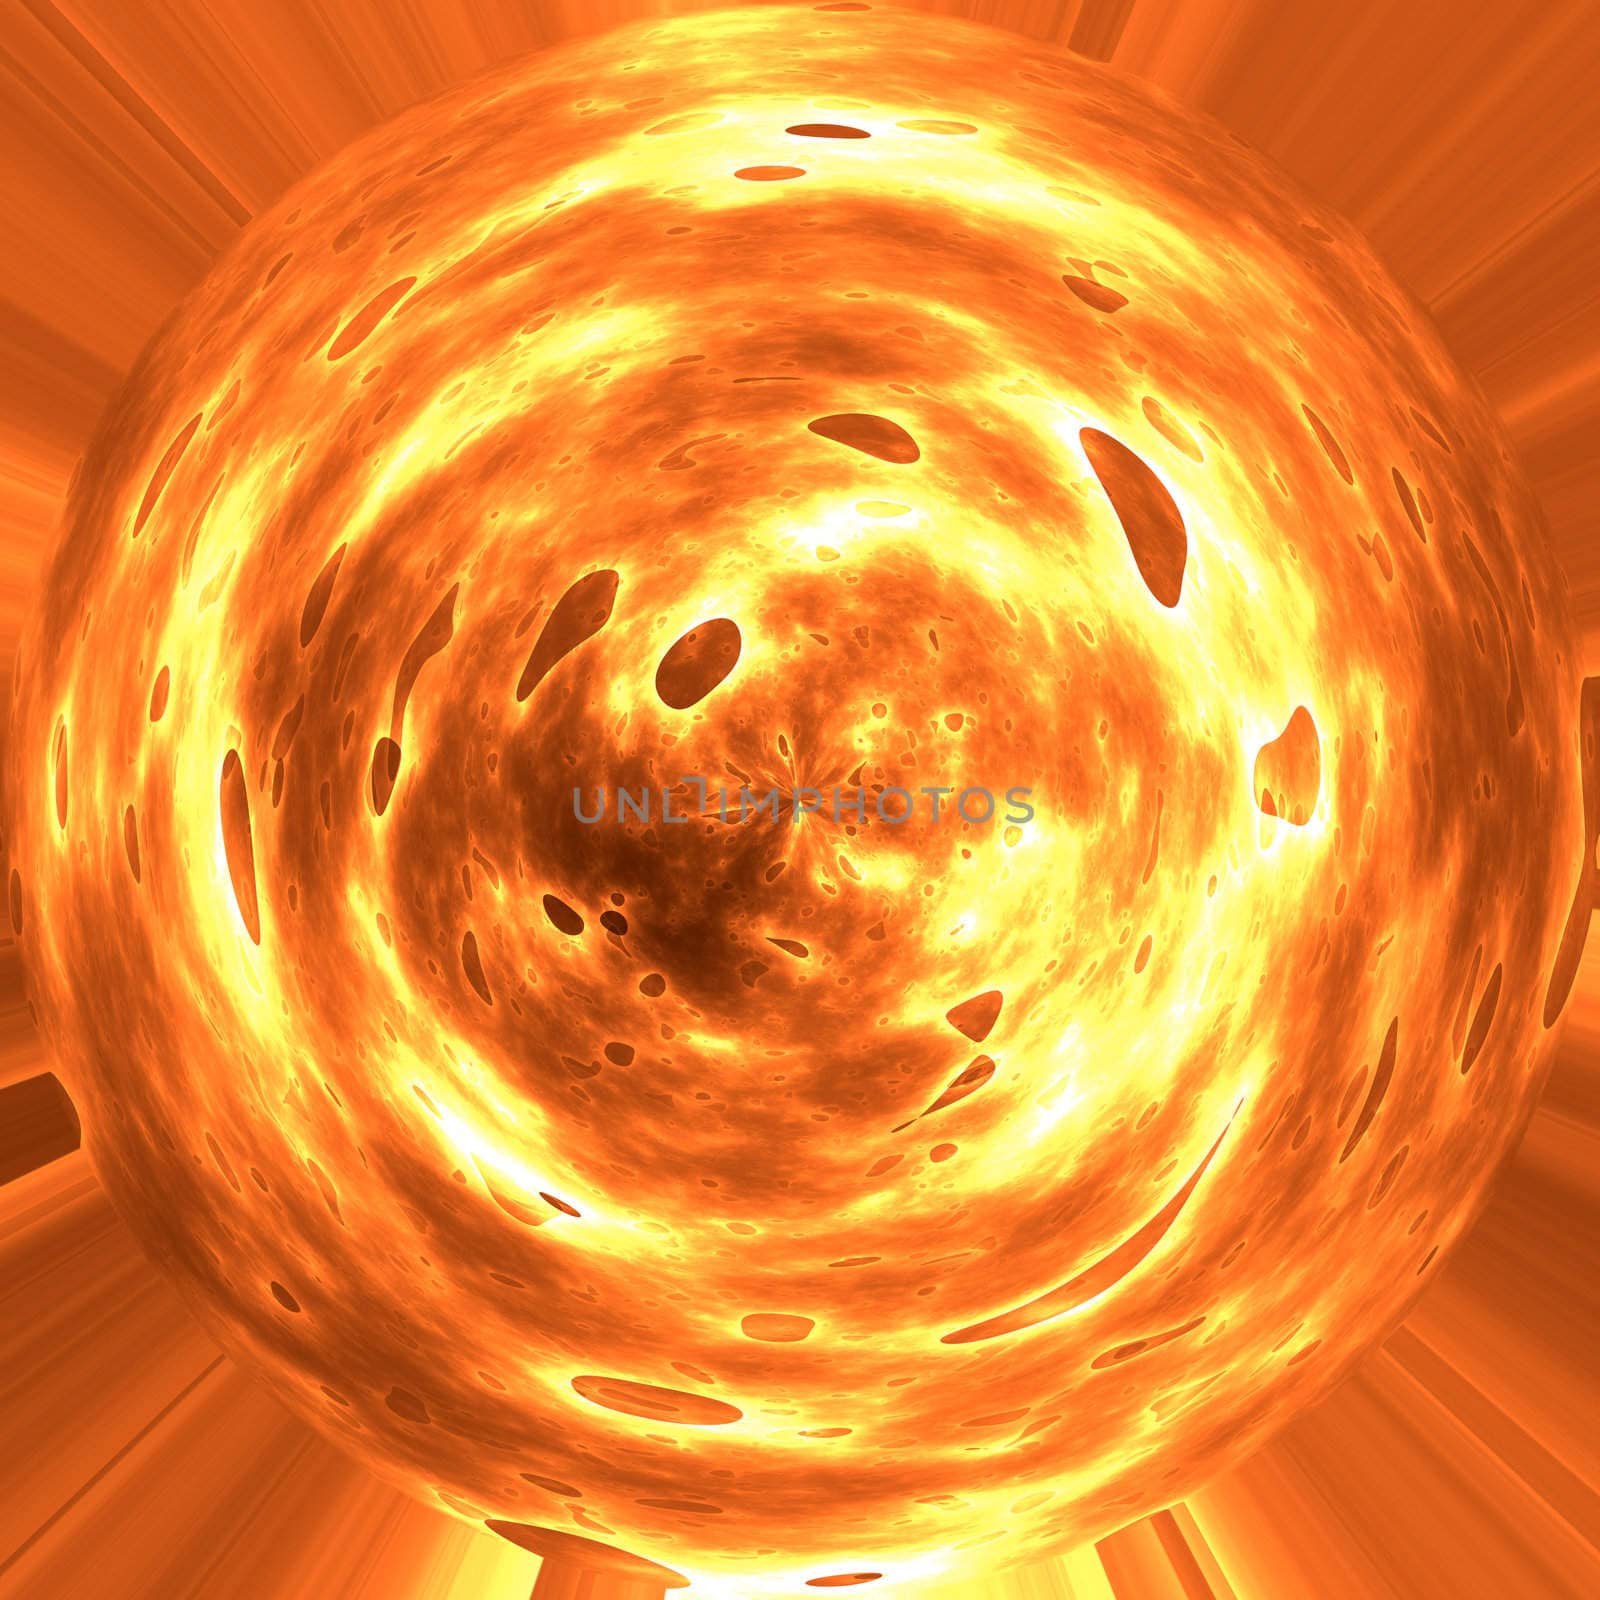 image of fire or burning planet or orb